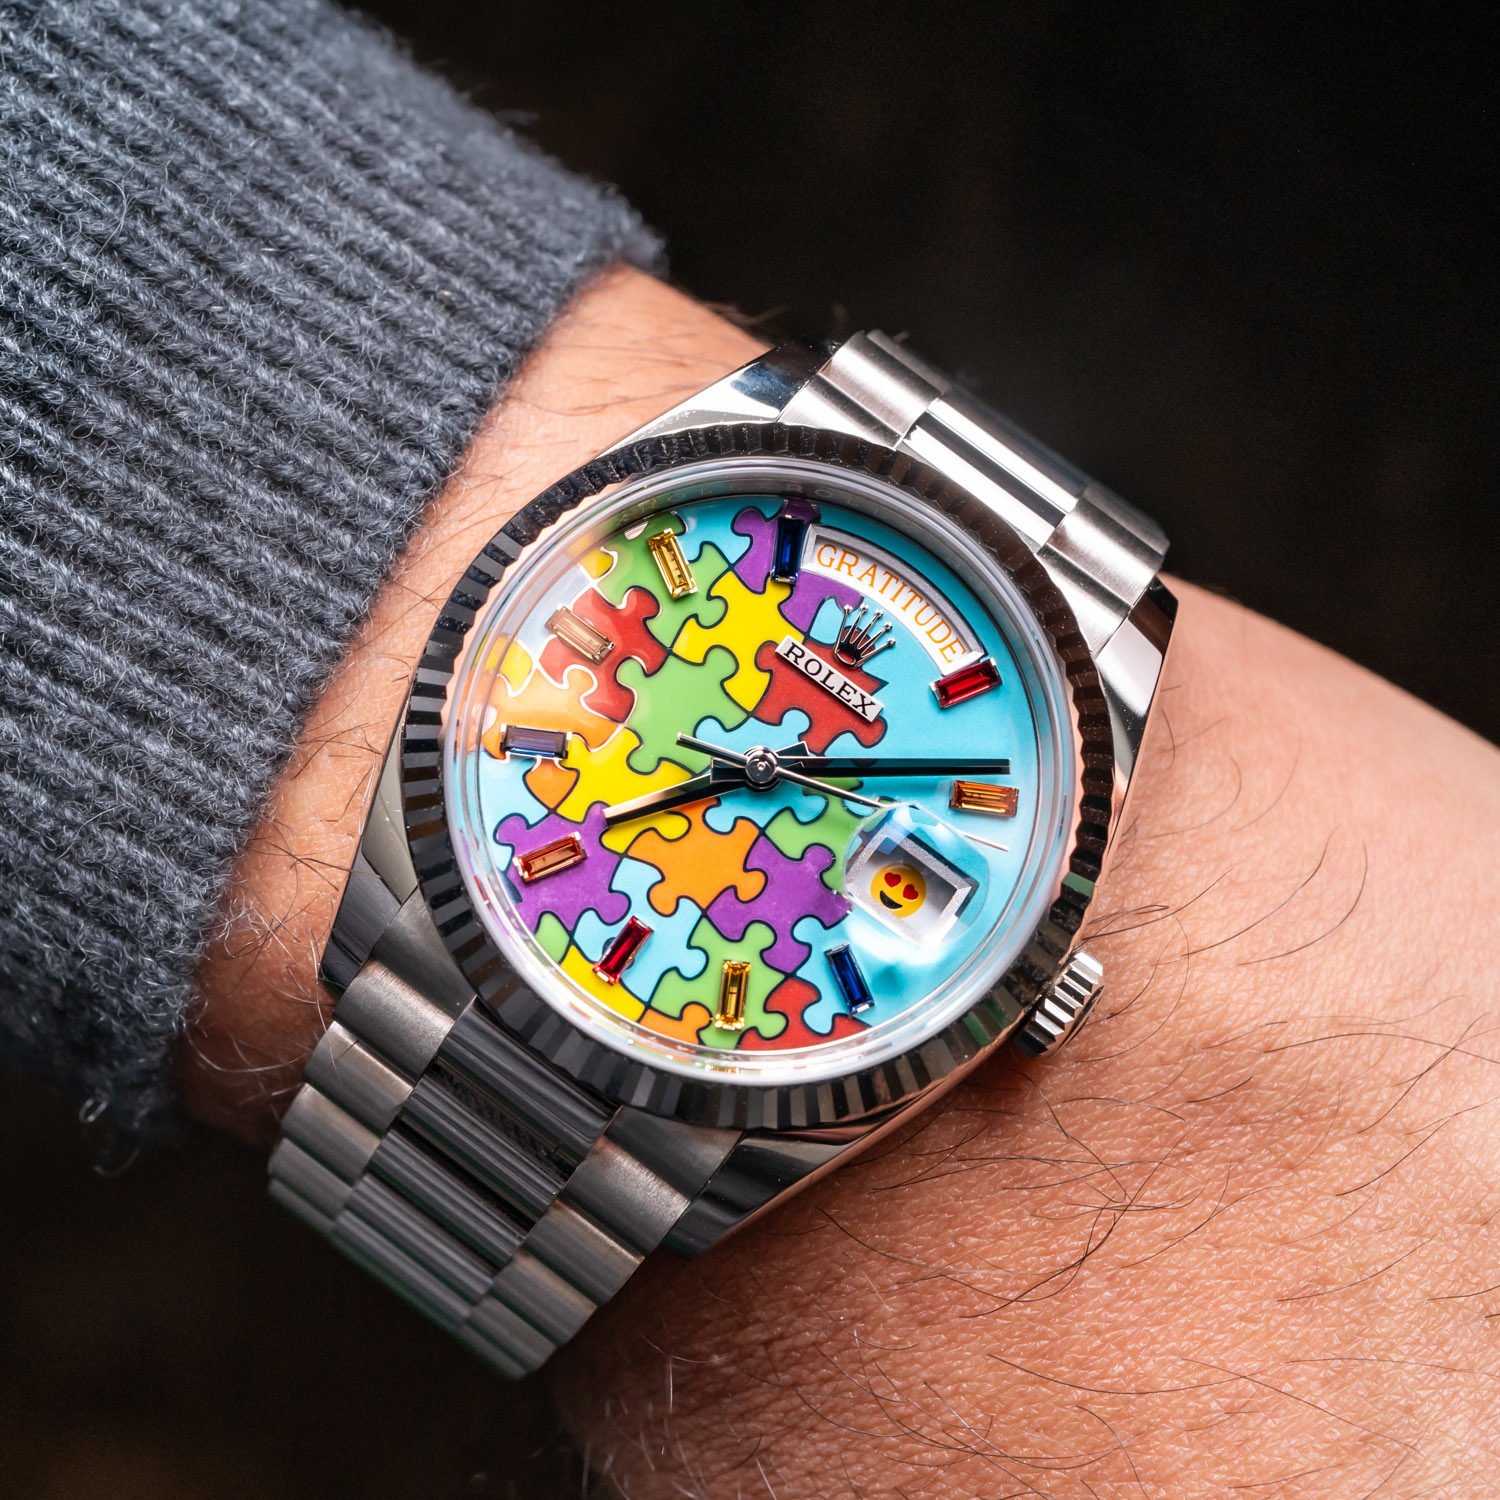 Hands-On: “Puzzles & Bubbles” Watches and the of Self-Seriousness | WatchTime - USA's No.1 Magazine